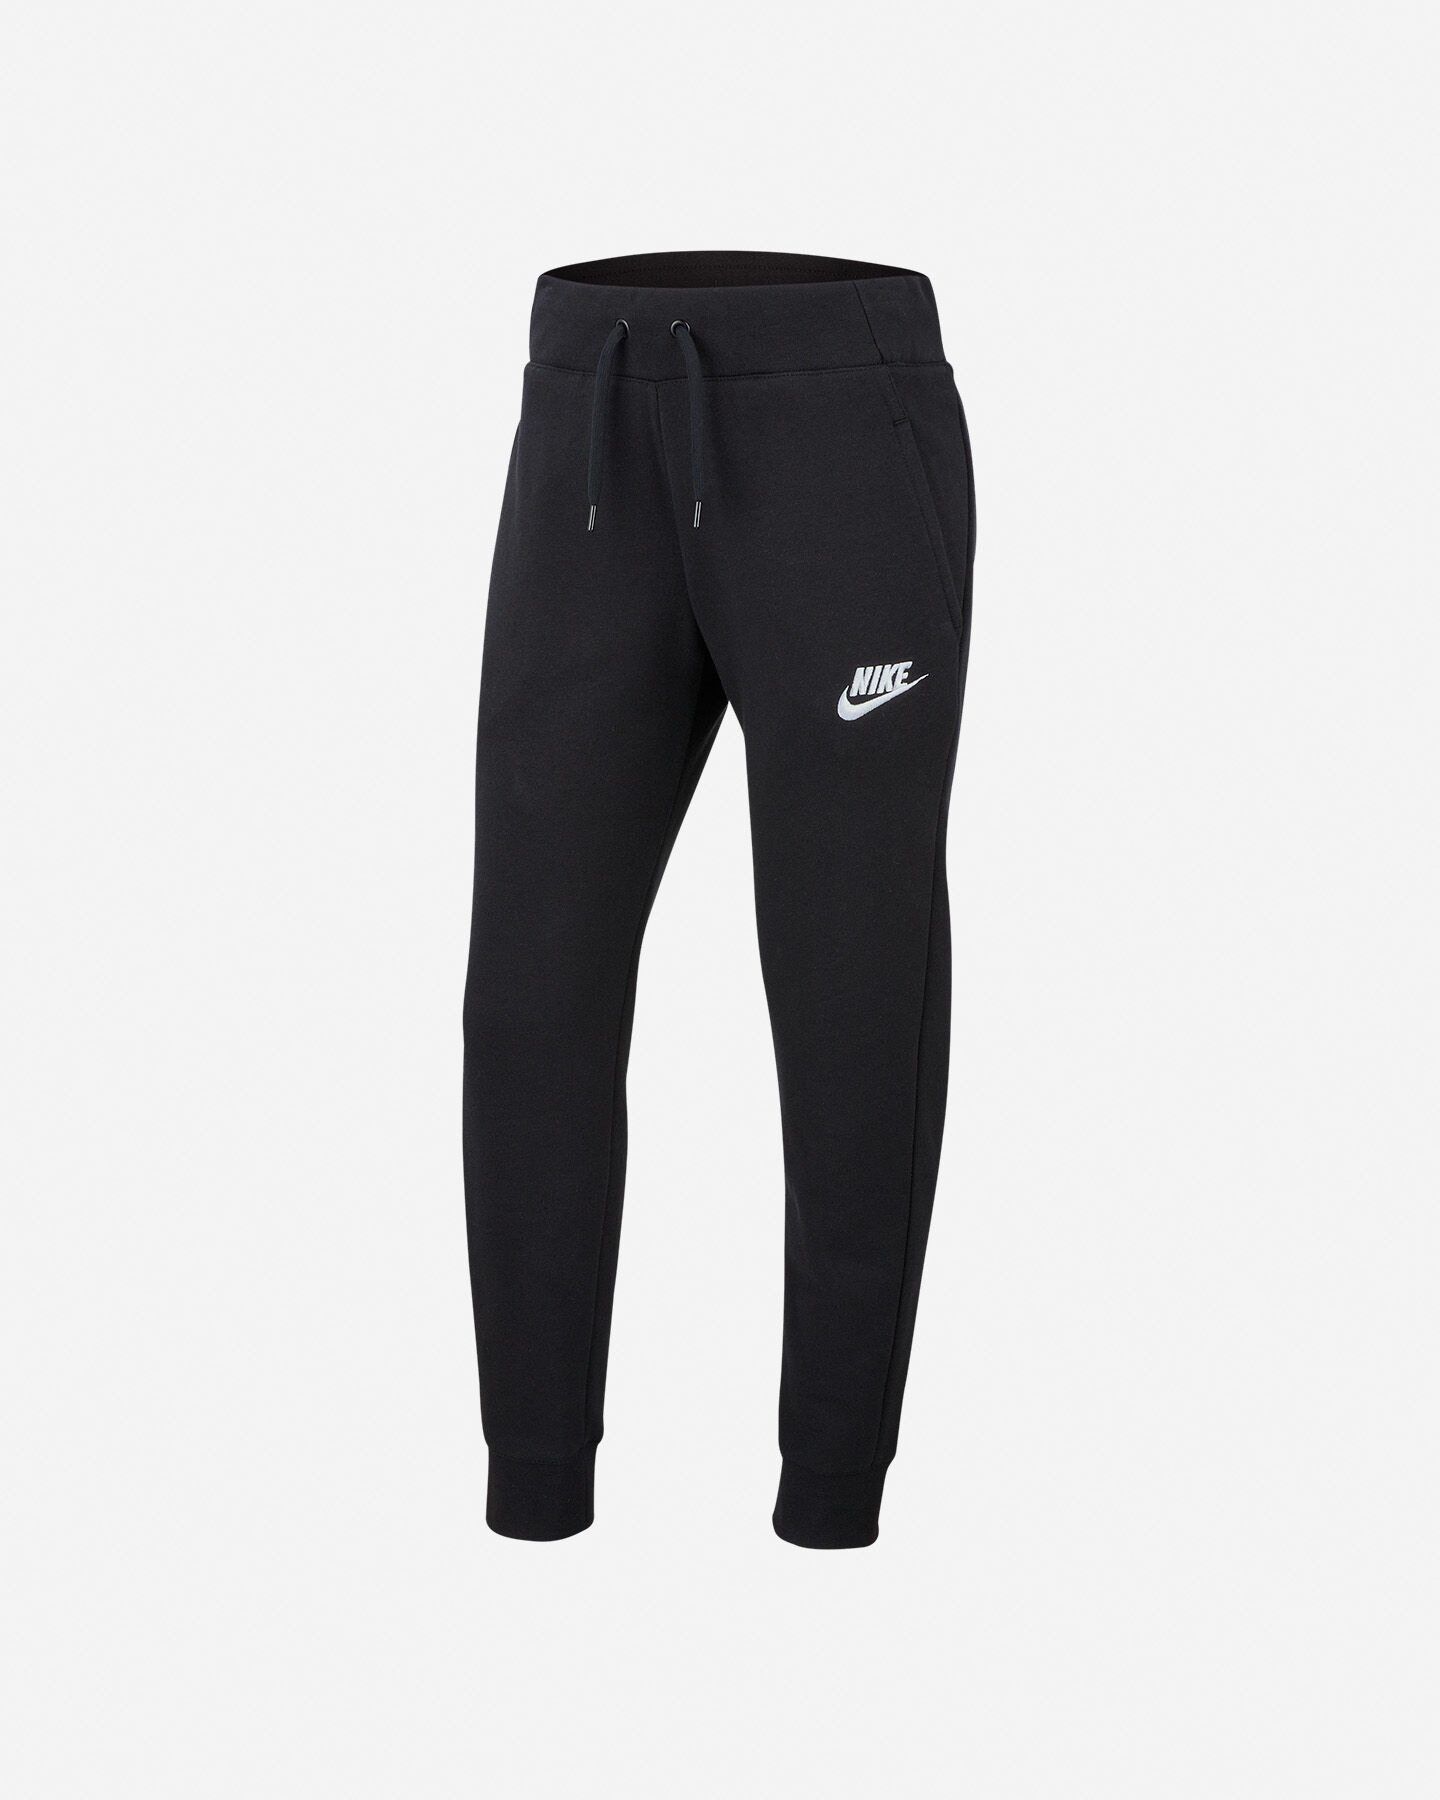  Pantalone NIKE YOUNG ATHLETES JR S5073085|010|S scatto 0